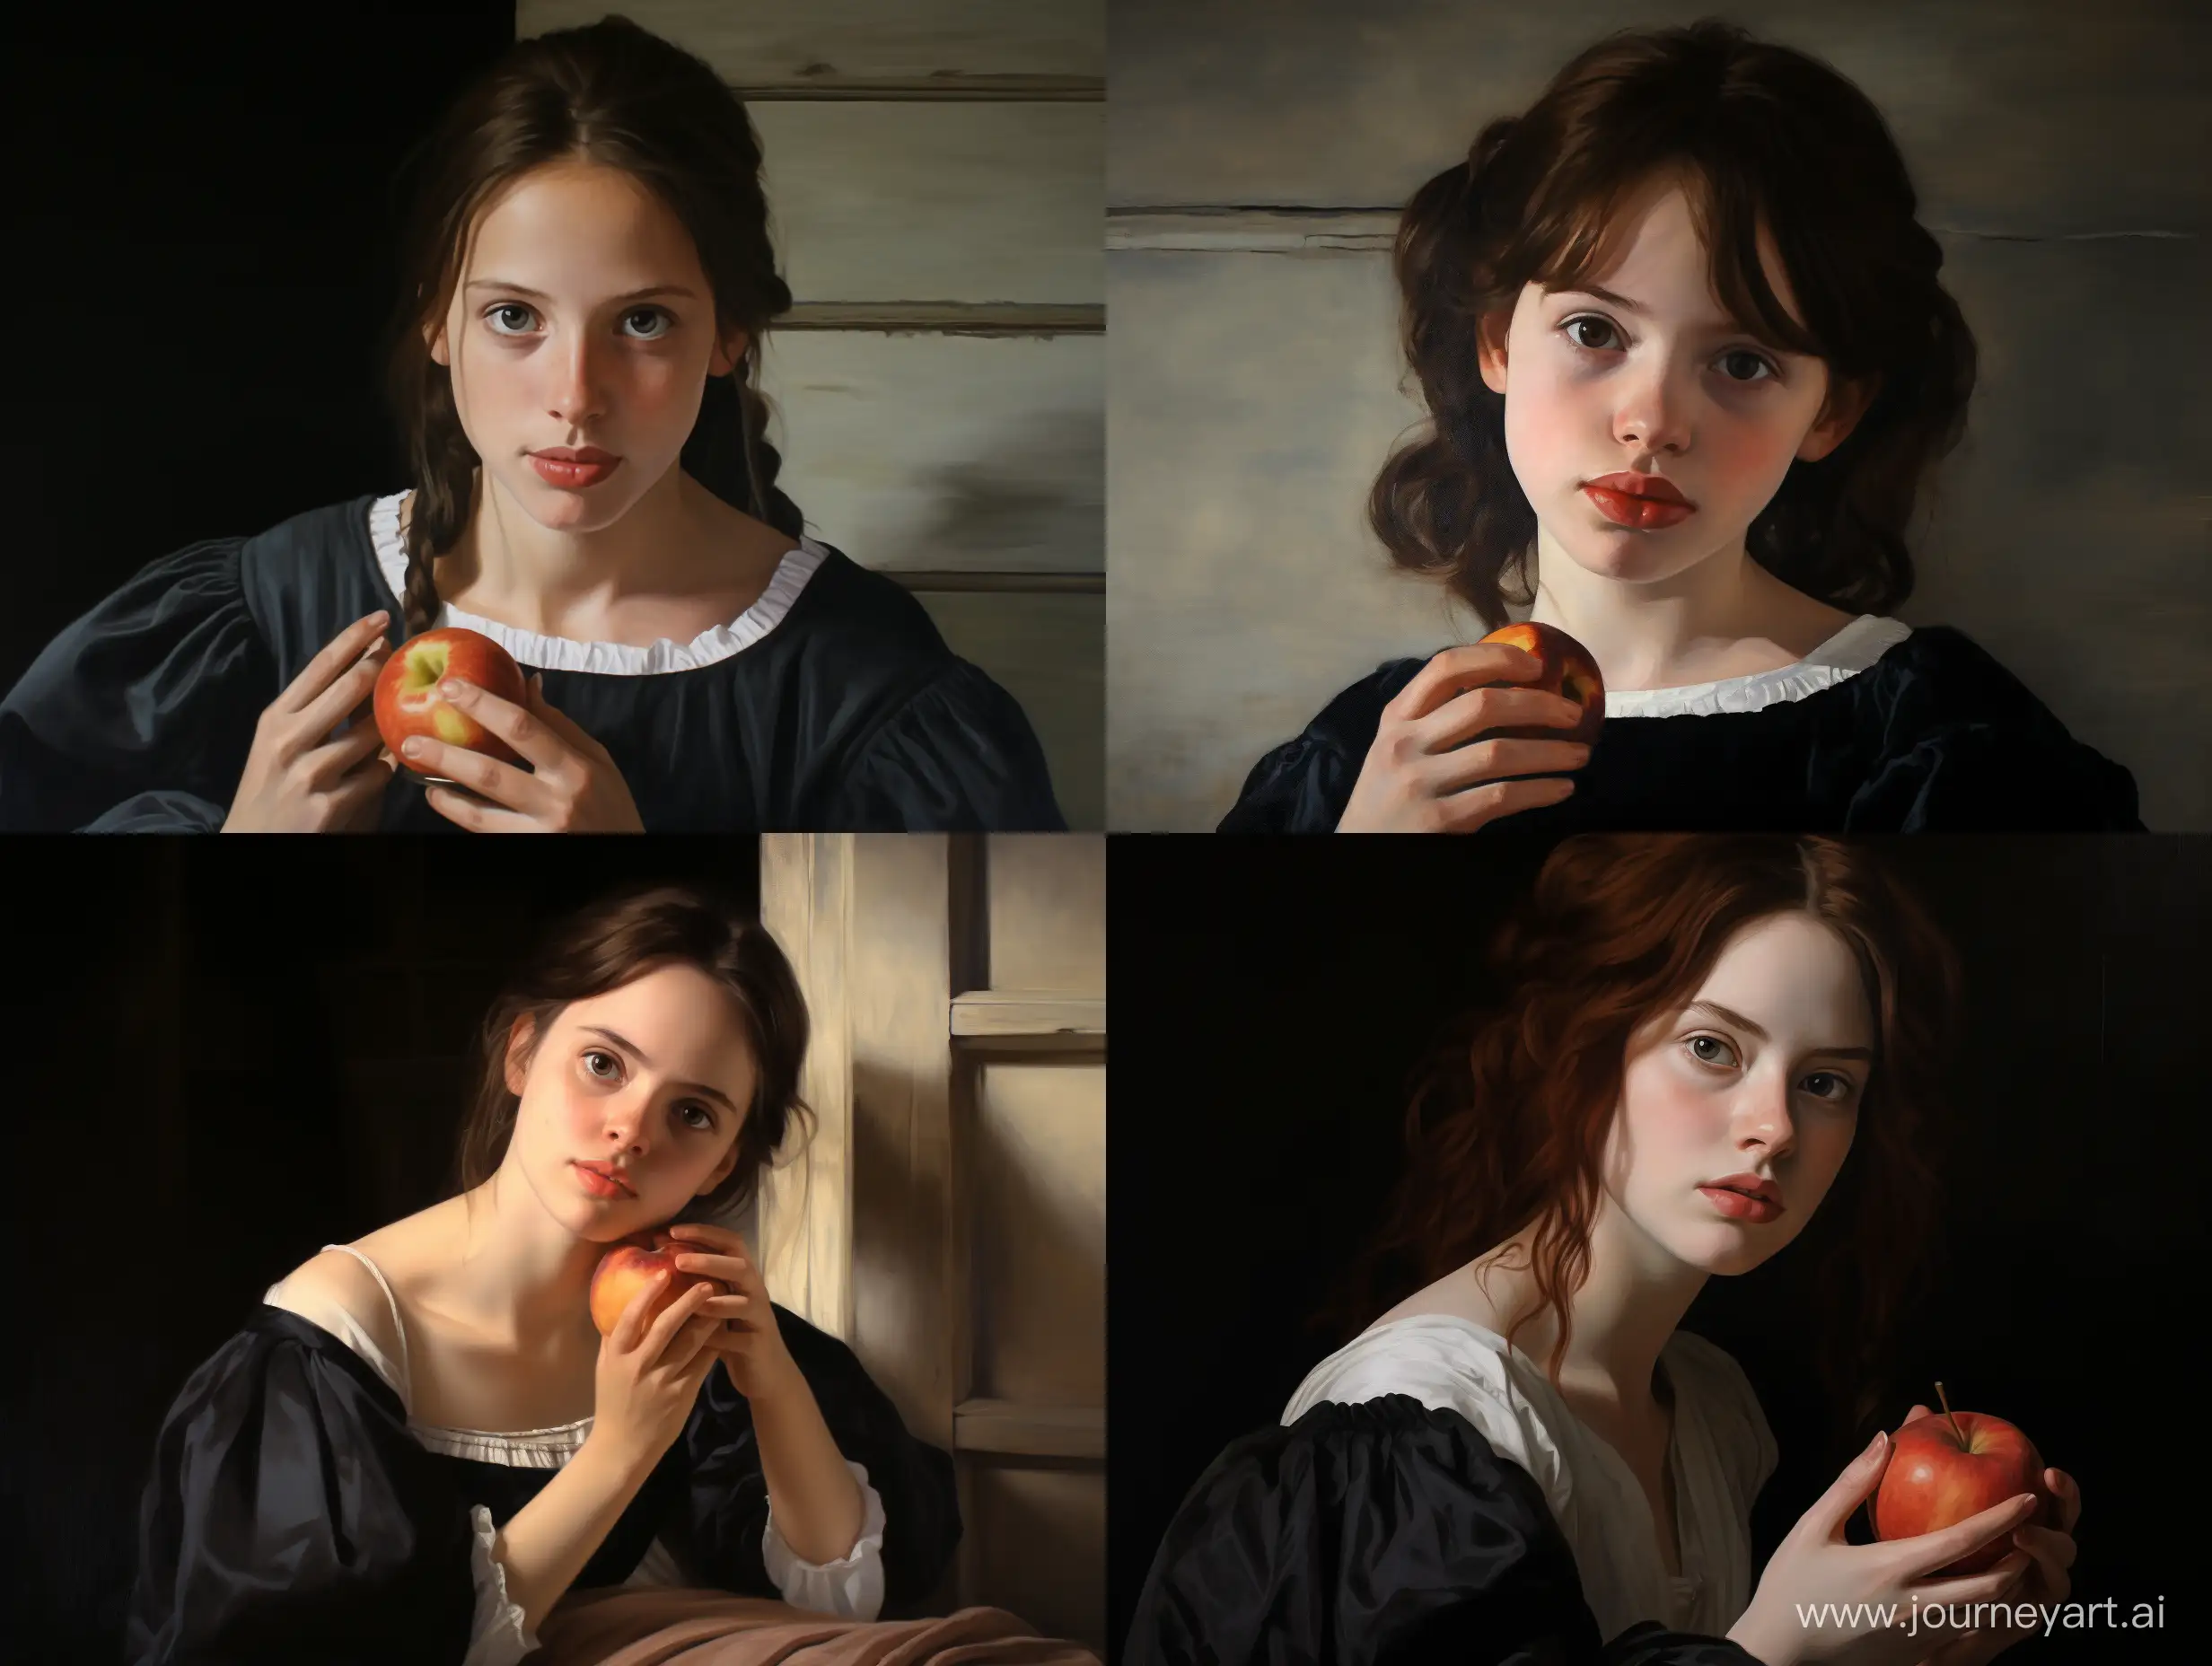 Realistic-Portrait-of-Girl-Eating-Apple-in-Velazquez-Oil-Painting-Style